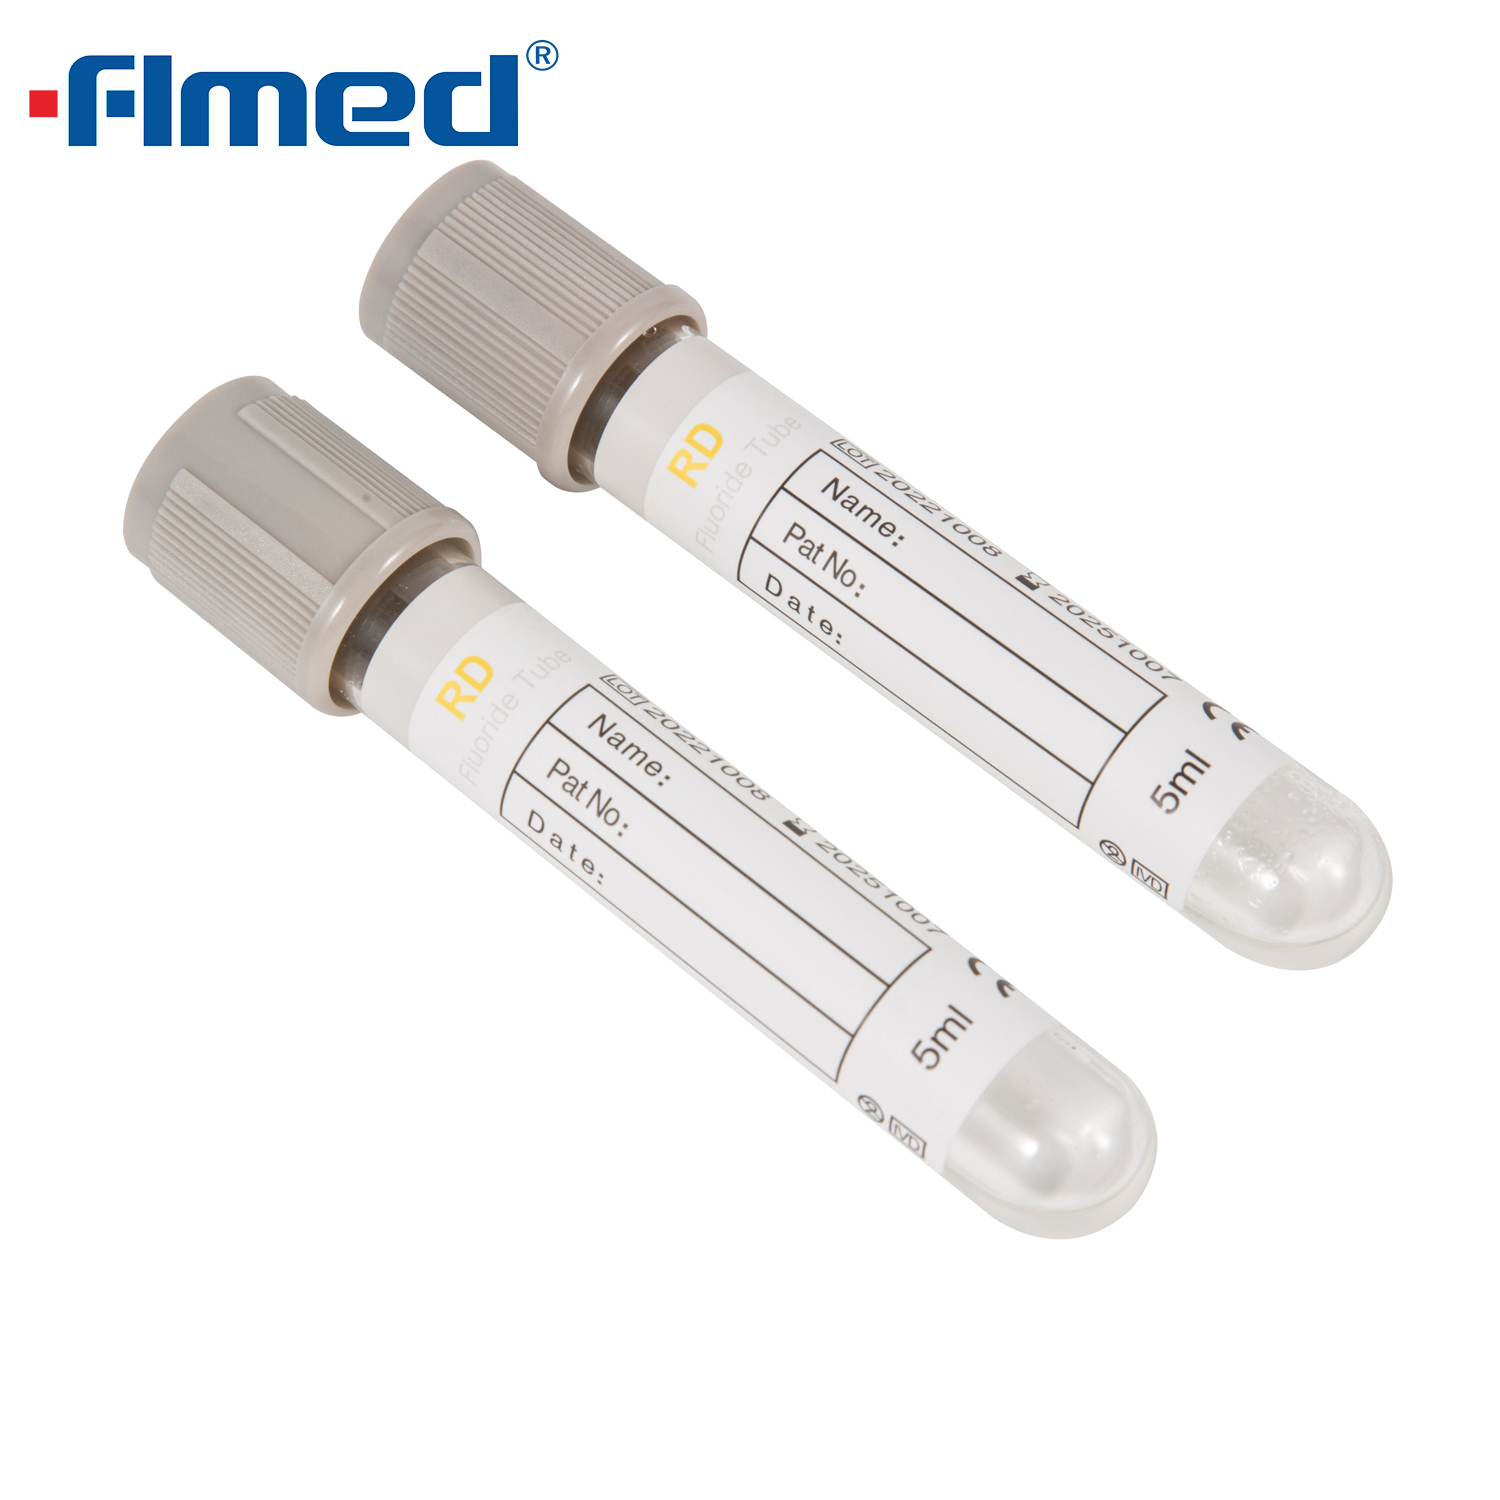 Vacuum Glass Blood Collection Tubes for Blood Samples Collection